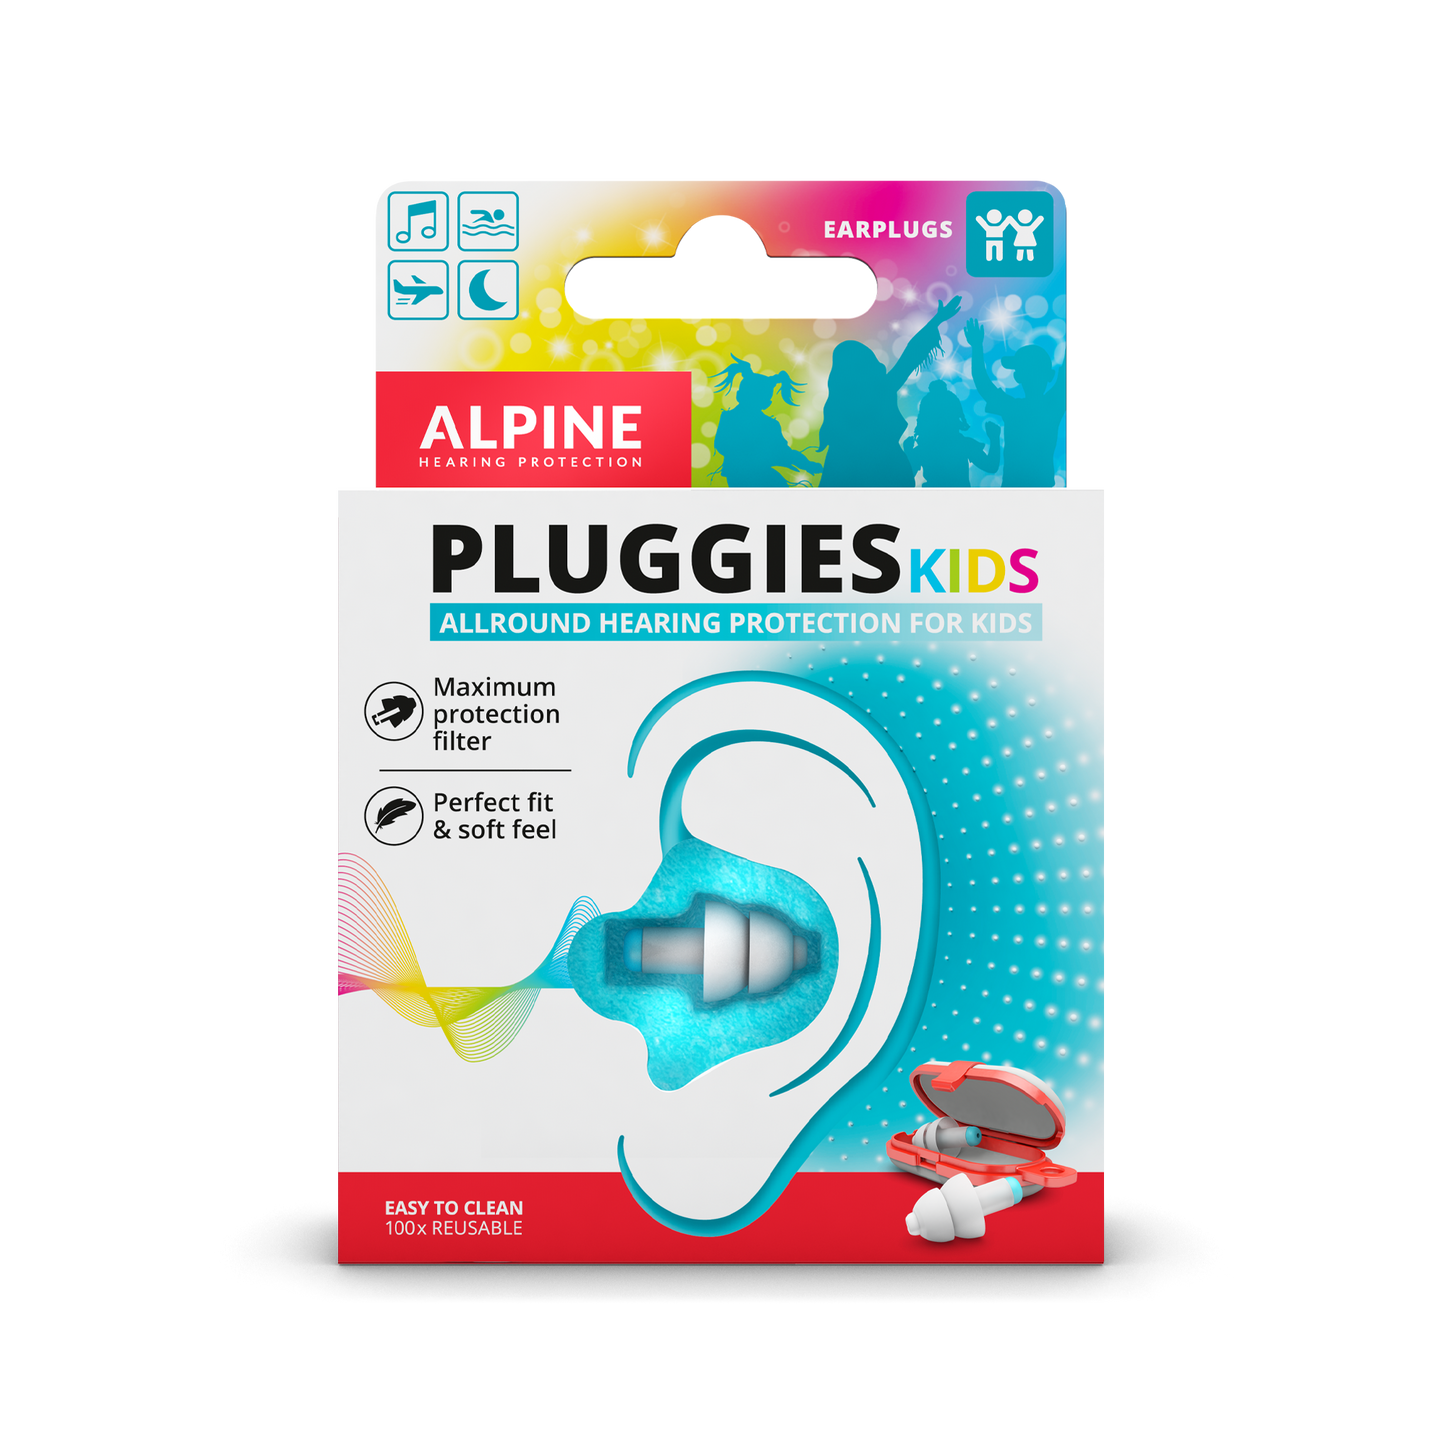 Alpine Pluggies Kids protects the ears specifically Alpine hearing protection Earplugs earmuffs protect your ear red dot award Muffy Baby Muffy Kids Pluggies Kids